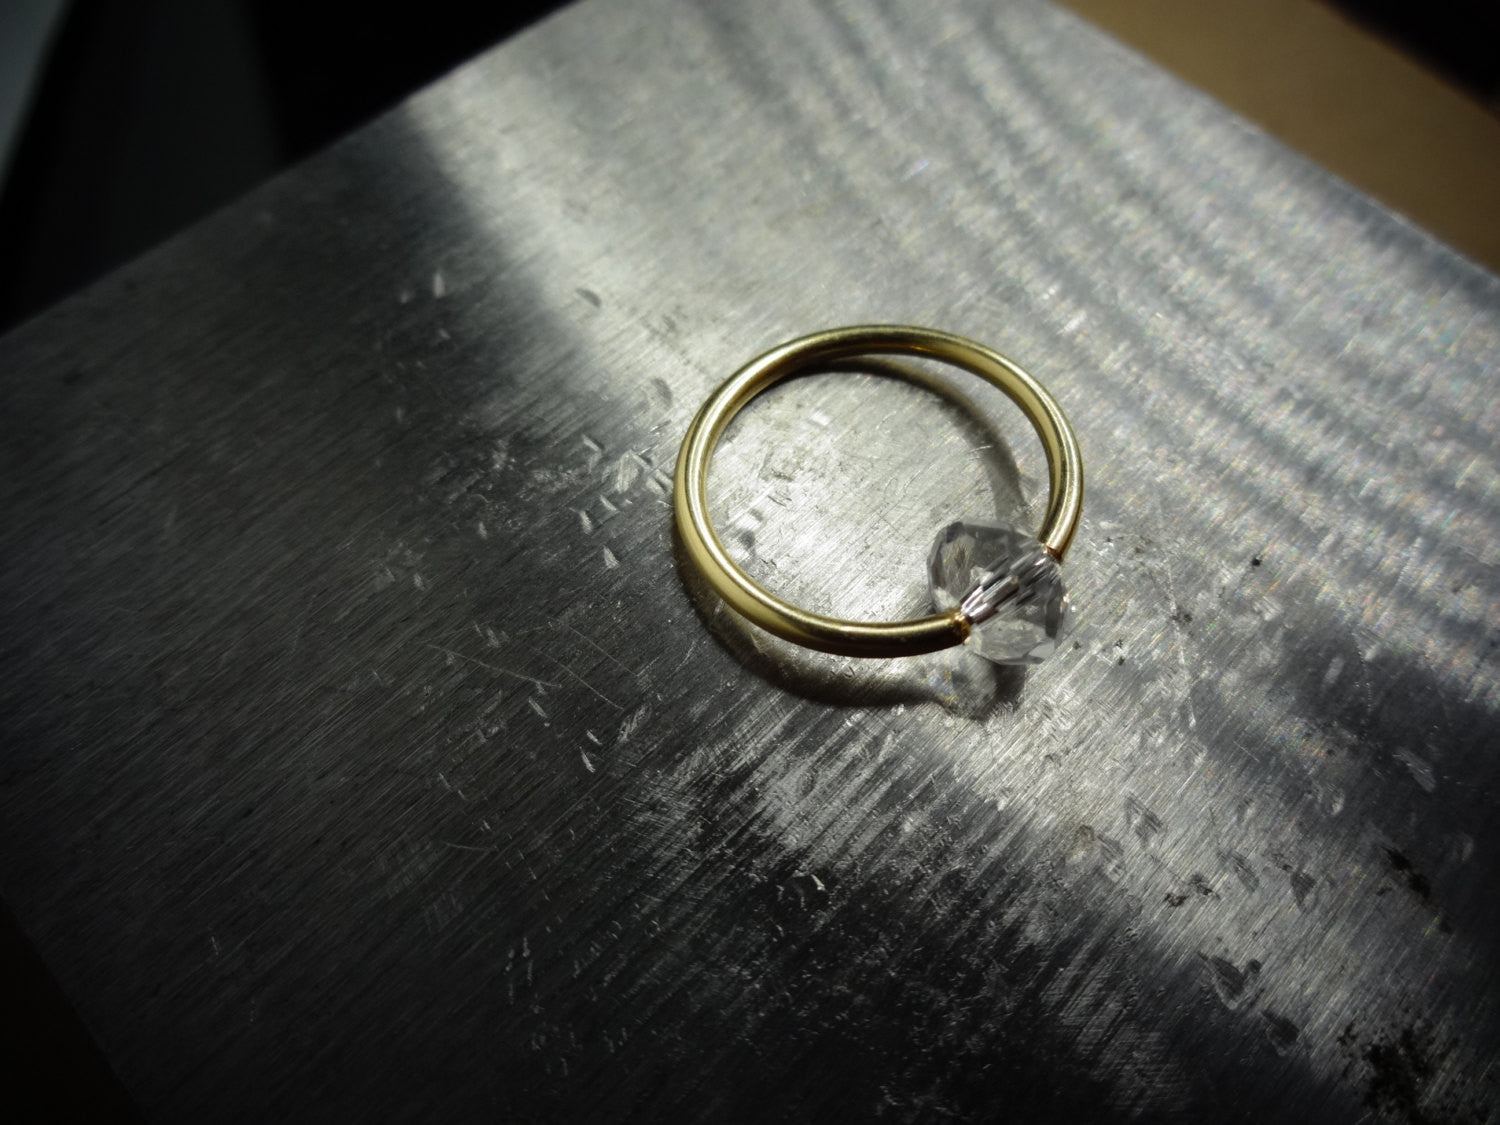 Captive Bead Ring made with CLEAR Swarovski Crystal - 16 ga Hoop - 14k Gold (Y, W, or R), Sterling Silver, or Platinum